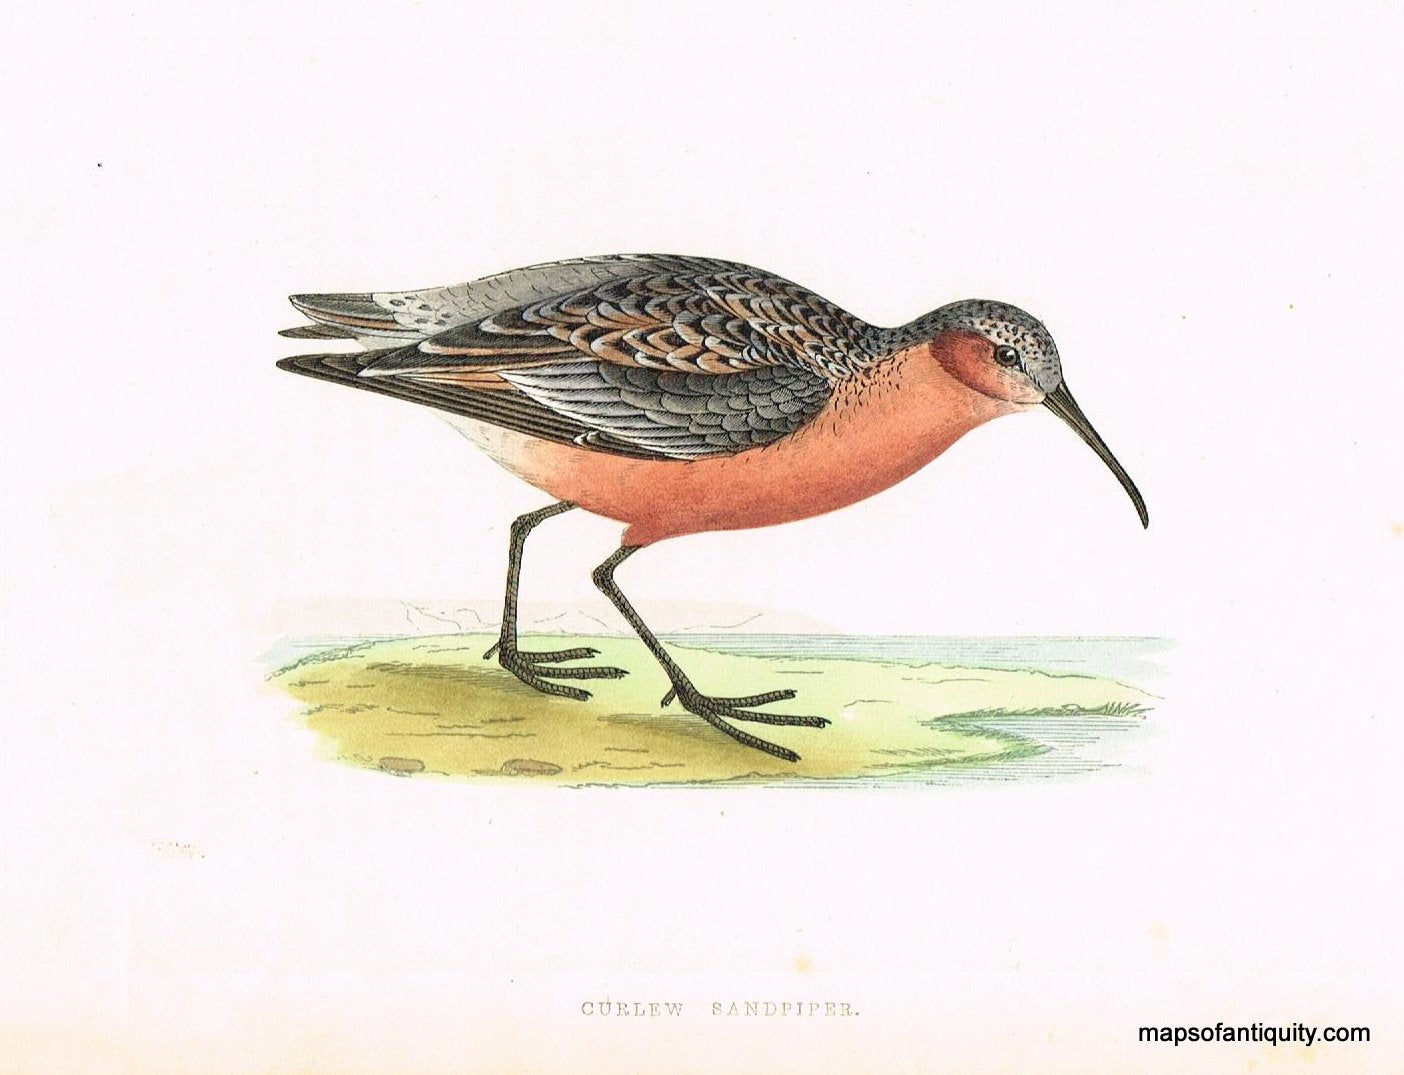 Antique-Hand-Colored-Engraved-Illustration-Curlew-Sandpiper-Morris-bird-Natural-History-Birds-1851-Morris-Maps-Of-Antiquity